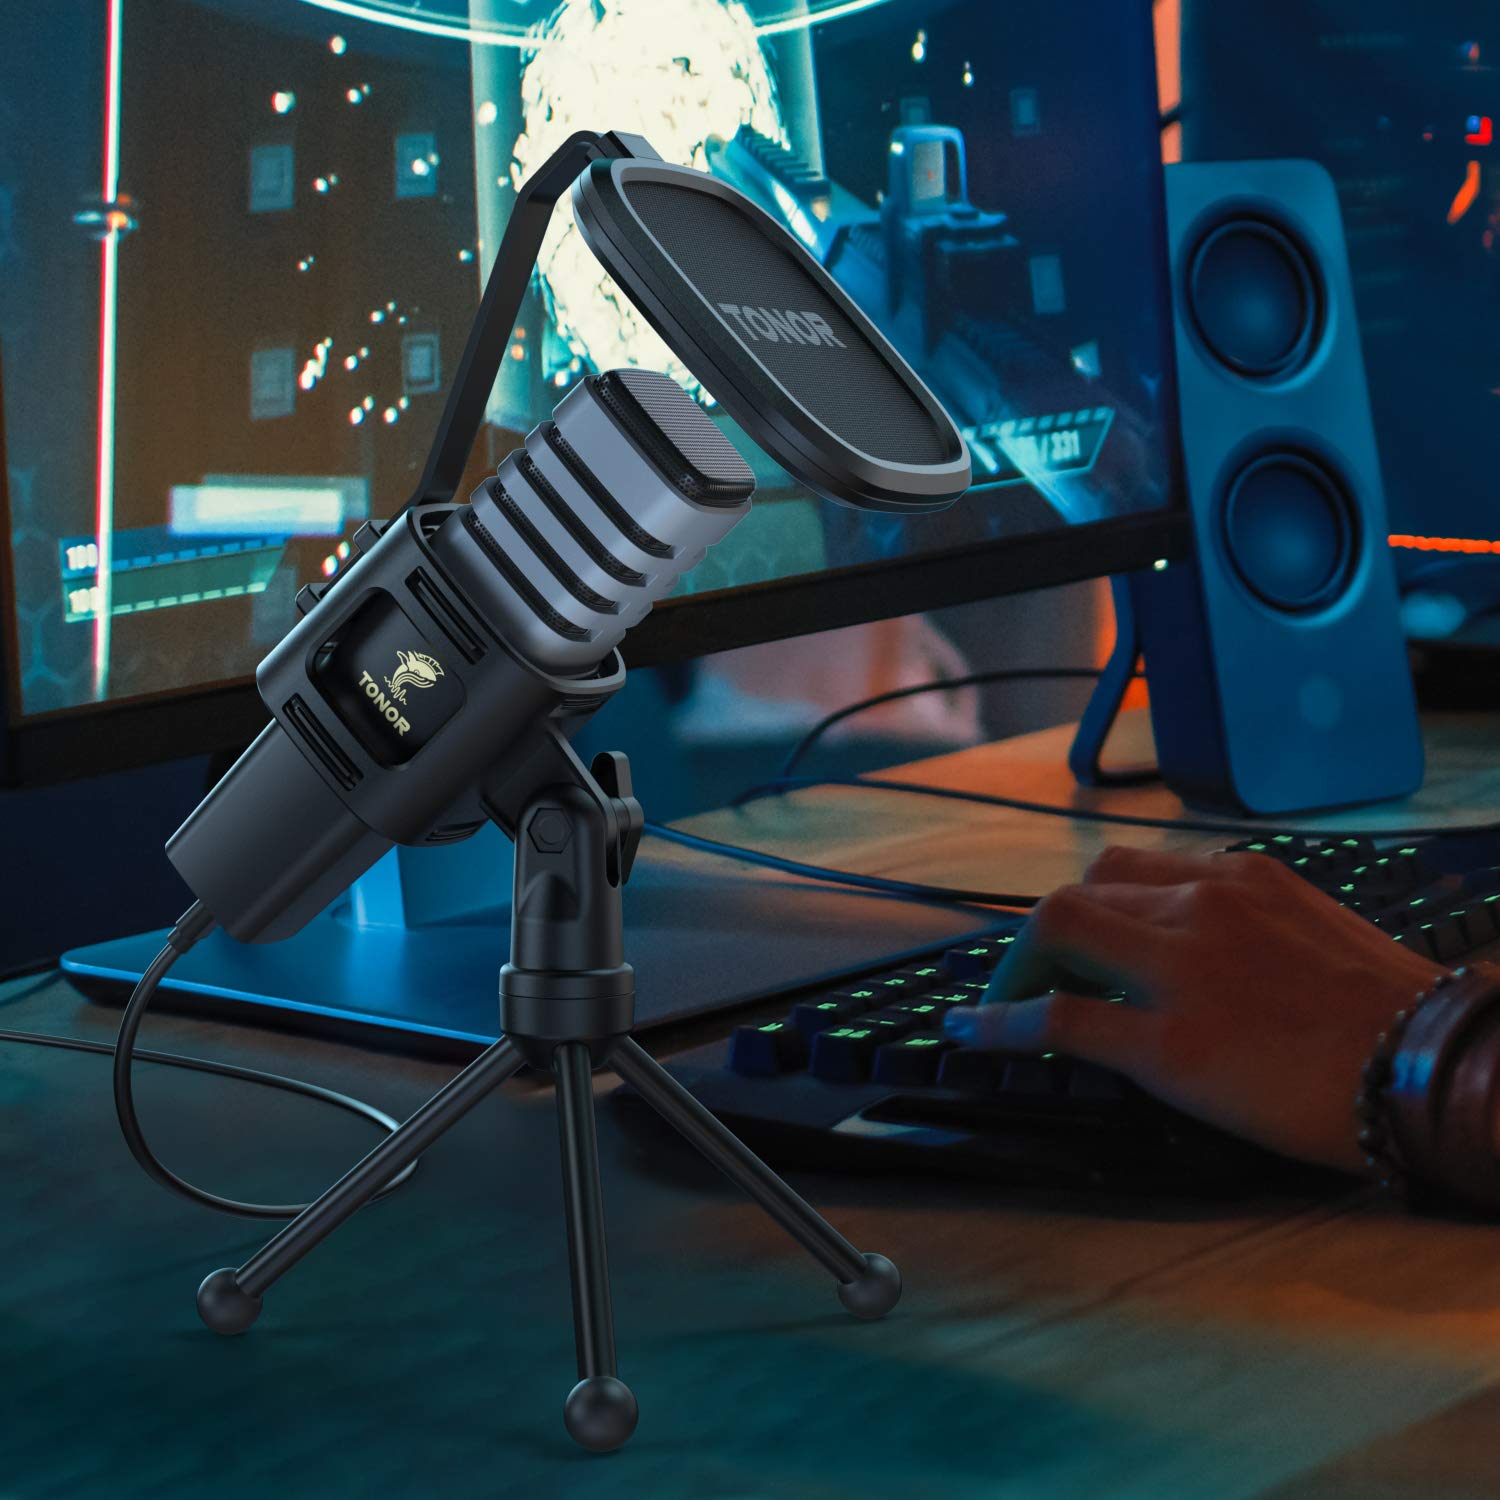 TONOR USB Microphone, Cardioid Condenser Mic with Tripod Stand, Pop Filter, Shock Mount, Compatible with Windows, MacOS, Linux, Ideal for Gaming, Streaming, Podcasting, YouTube, Voice Over, Twitch